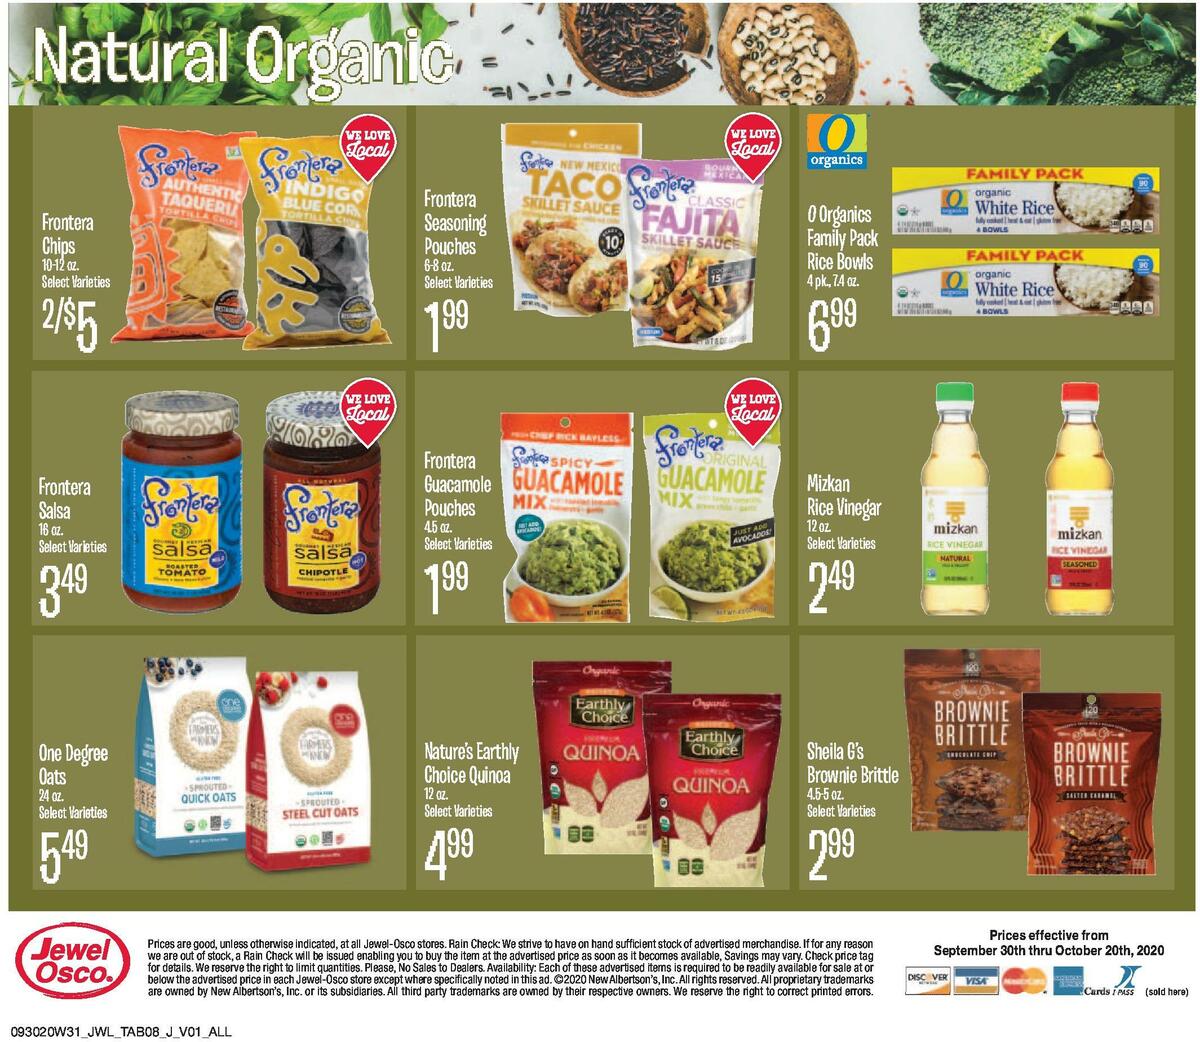 Jewel Osco Speciality Items and Seasonal Favorites Weekly Ad from September 30